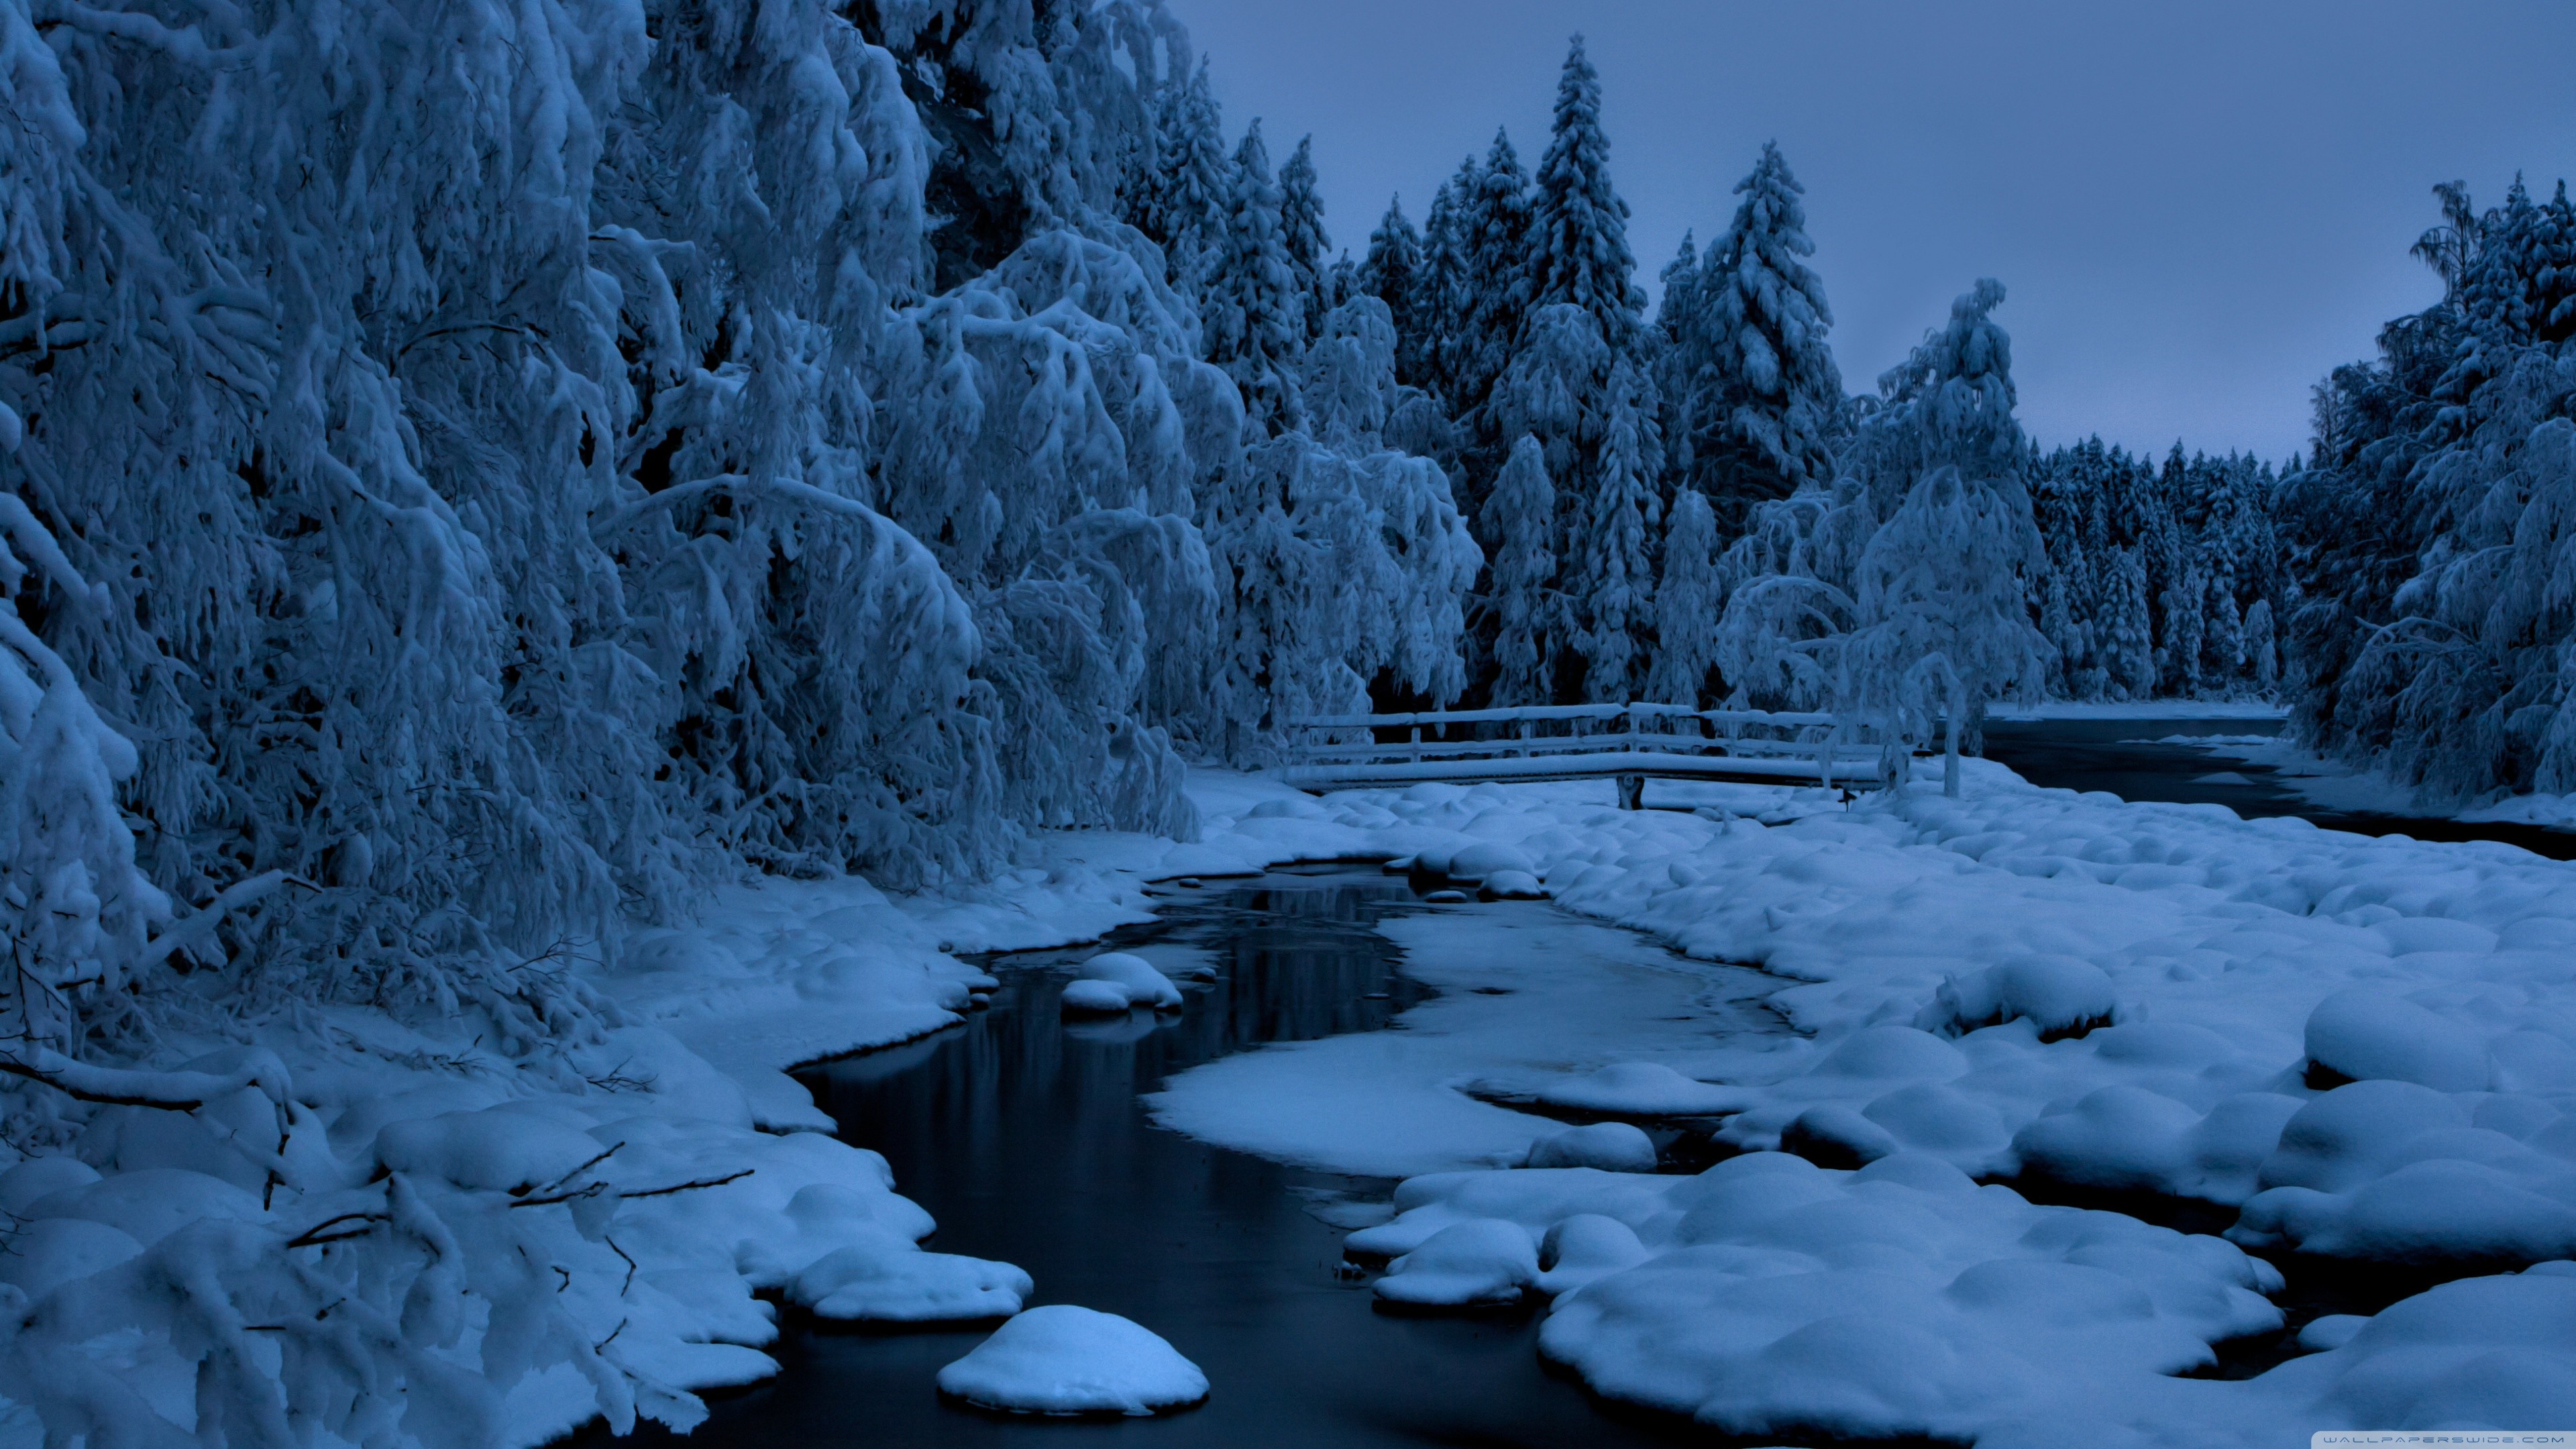 3840x2160 ... Bench after heavy snowfall wallpapers and images - wallpapers . ...